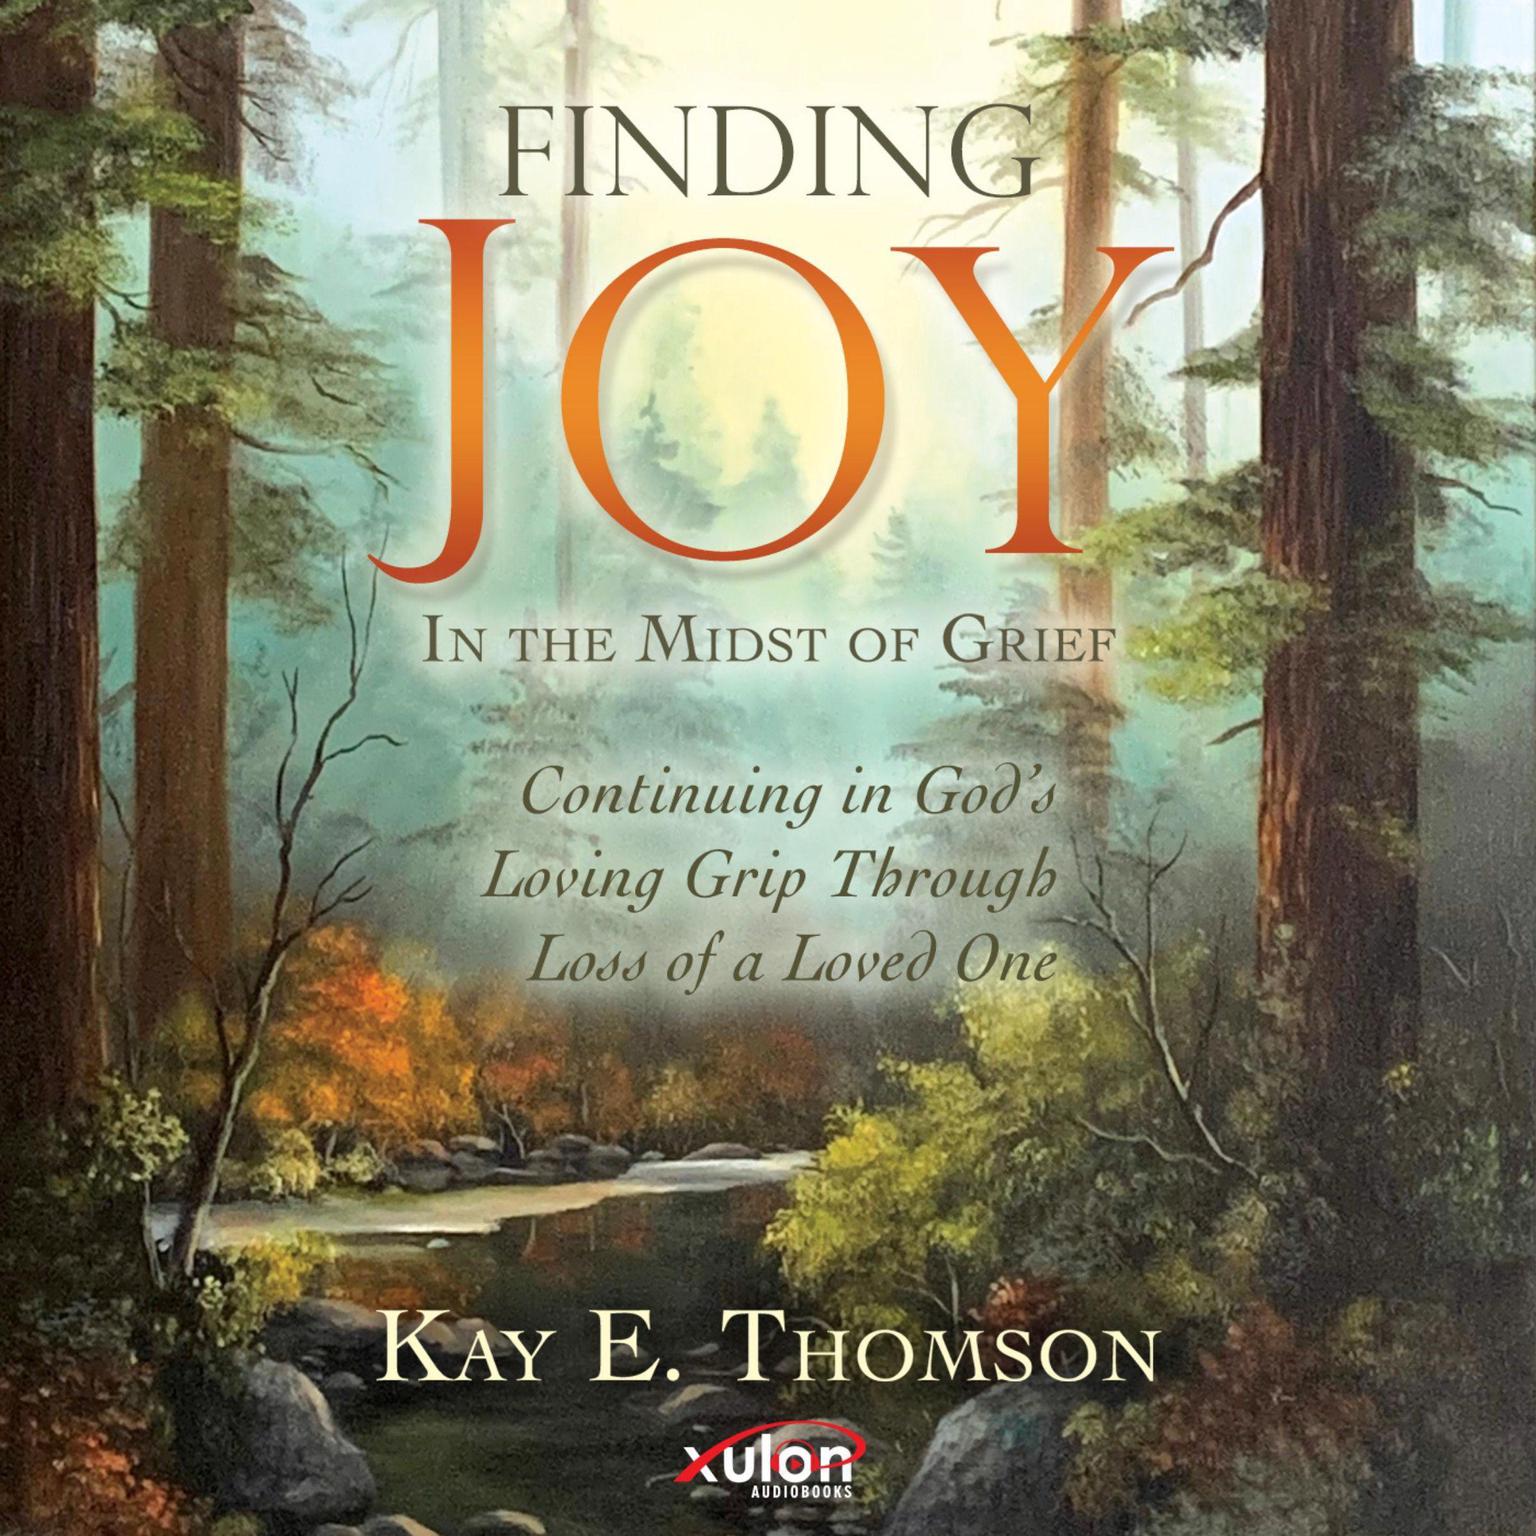 Finding JOY In the Midst of Grief: Continuing in God’s Loving Grip Through Loss of a Loved One Audiobook, by Kay E. Thomson